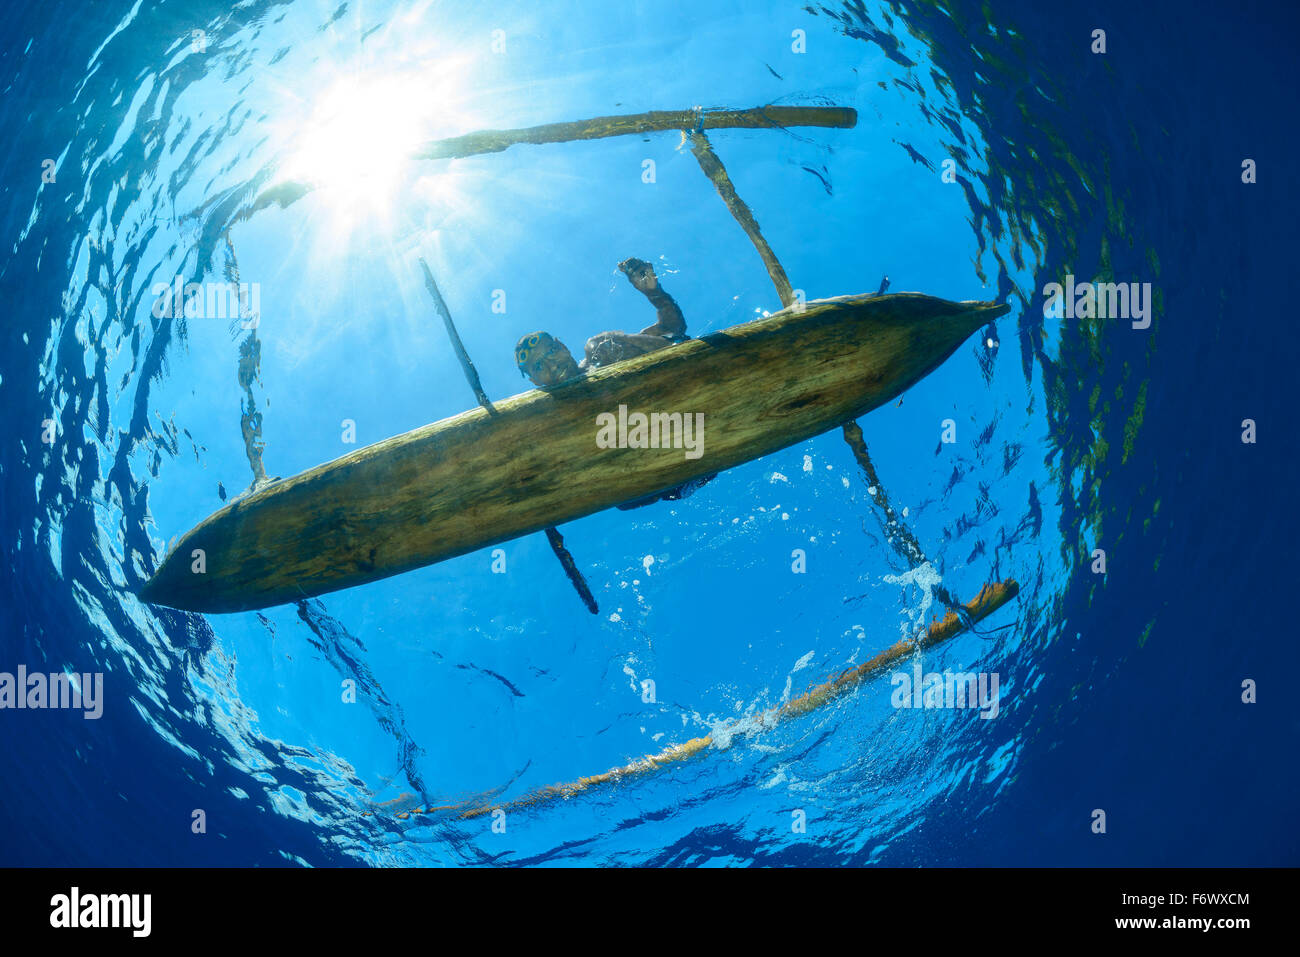 Local Spear Fisherman with outrigger boat, Alor Archipelago, Indonesia, Sawu Sea, Pantarstrait, Indian Ocean Stock Photo